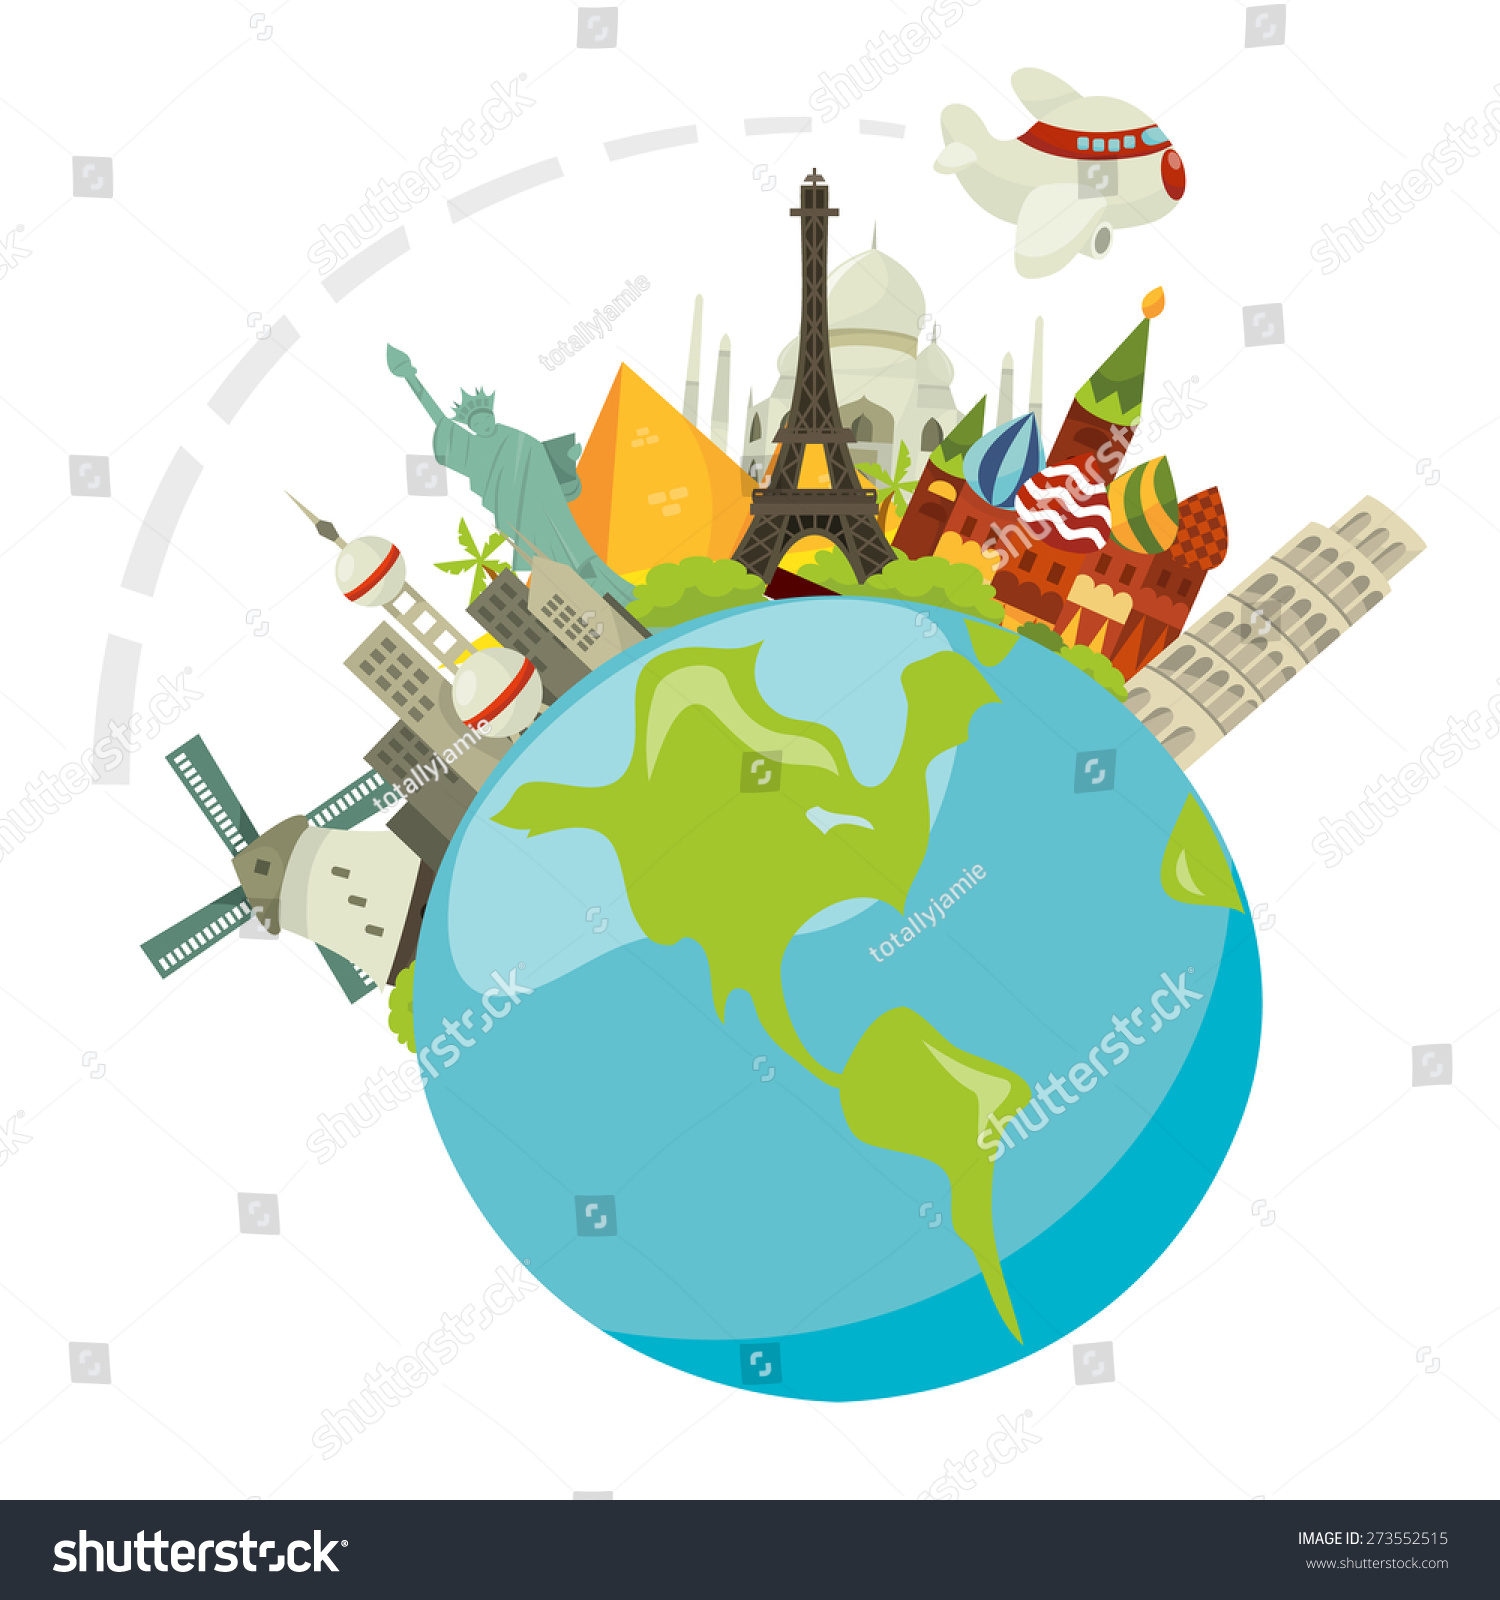 travel abroad clipart - photo #33